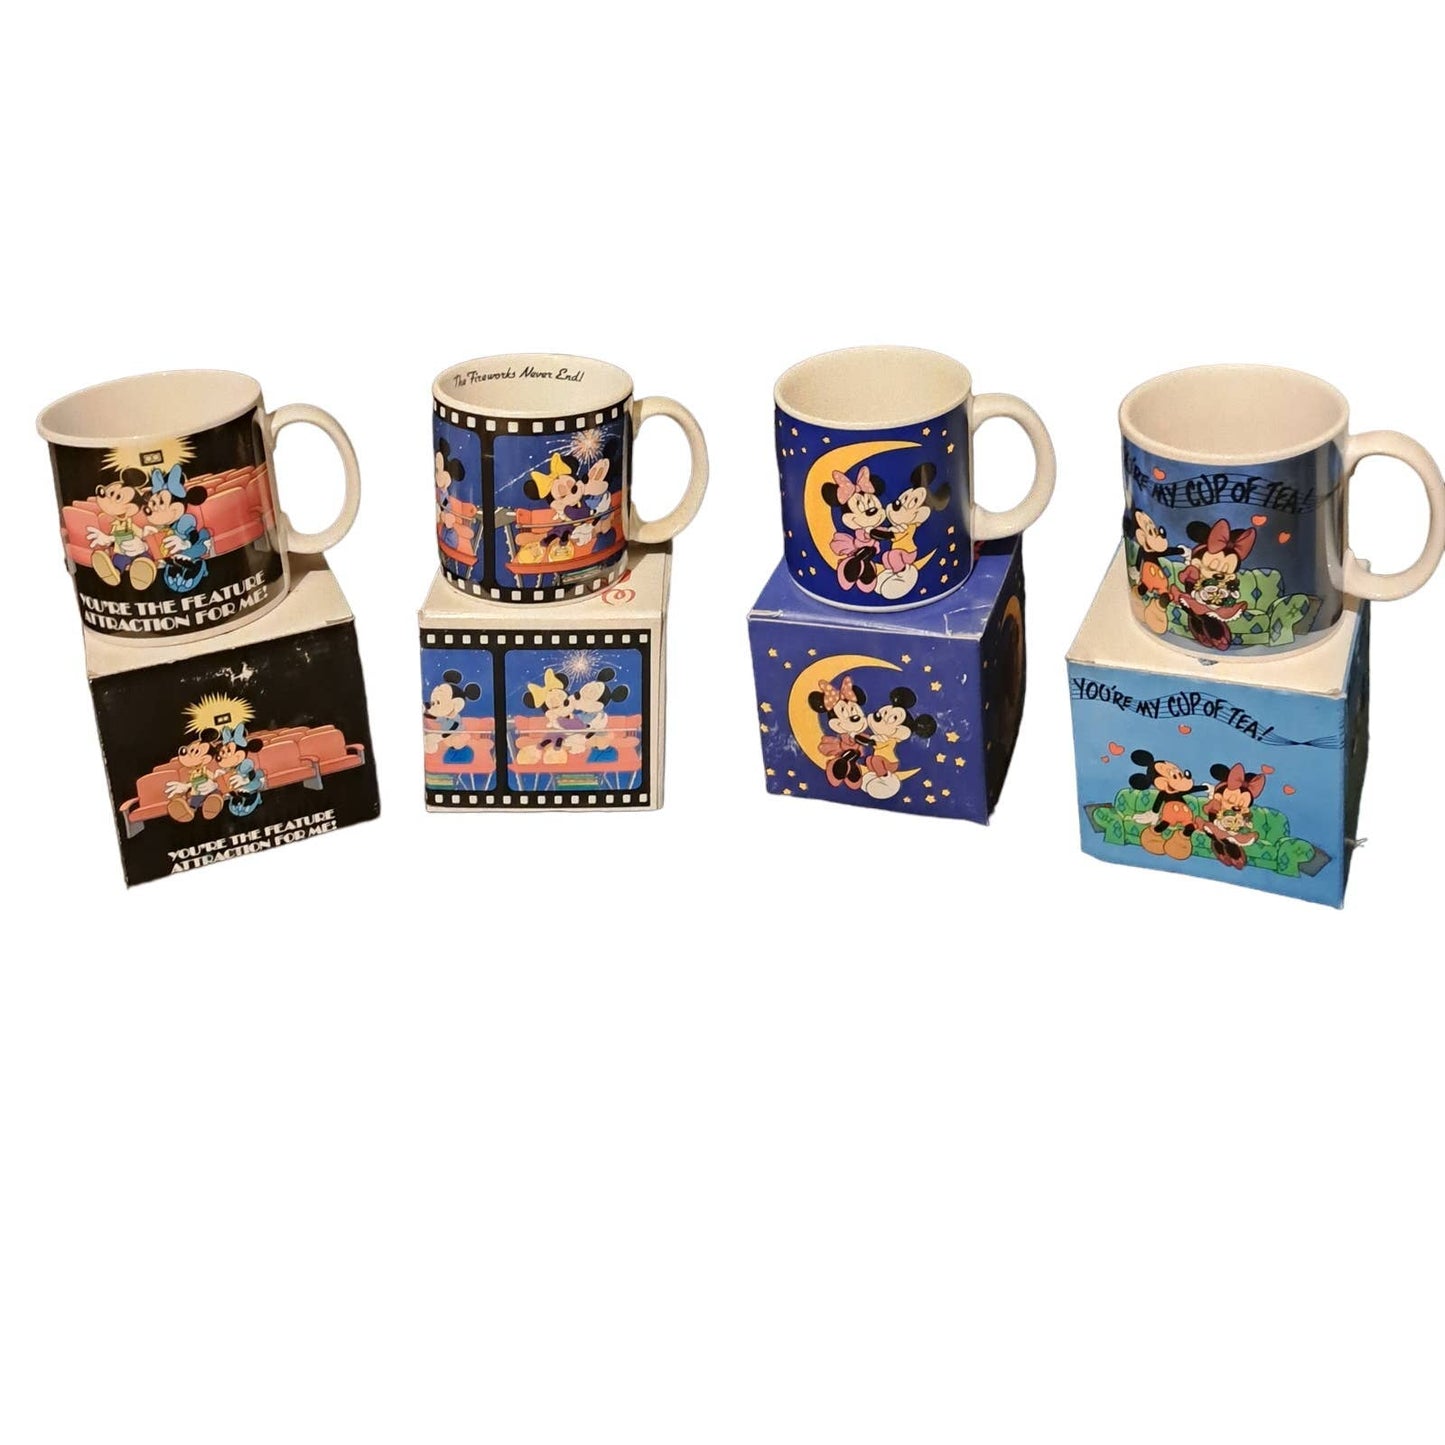 VERY VINTAGE Mickey & Minnie in LOVE Coffee Cups Circa 1980